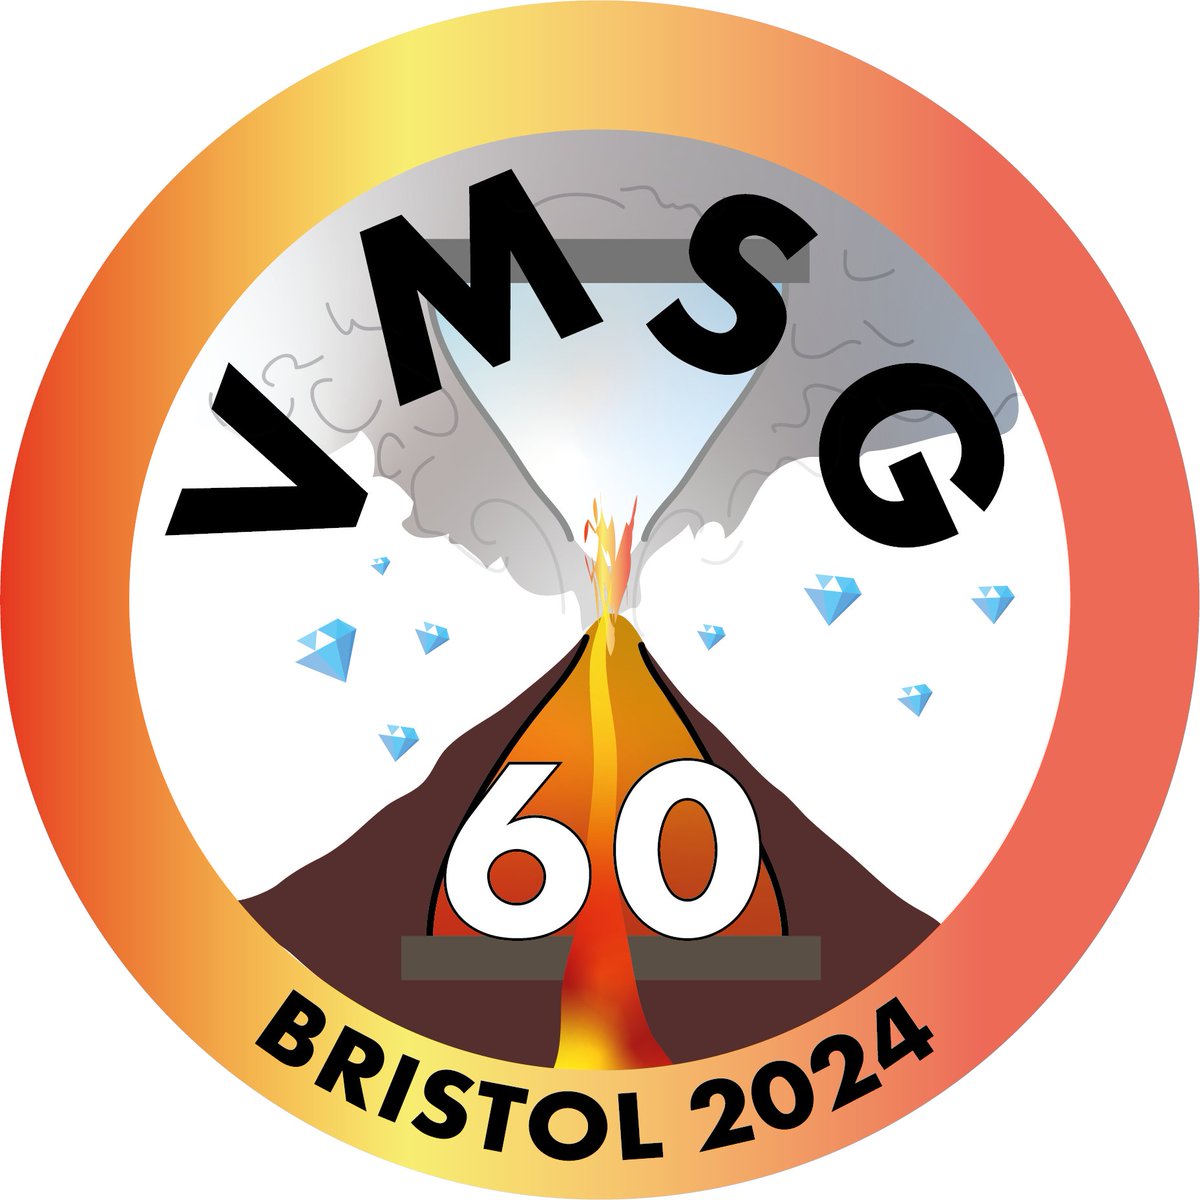 Here we go everyone - @vmsg_uk 2024 meeting in Bristol, 3-5th January. This is the 60th anniversary of the Volcanic and Magmatic Studies Group, so we're going to try and put on a show for you! All the info we can release so far is below...